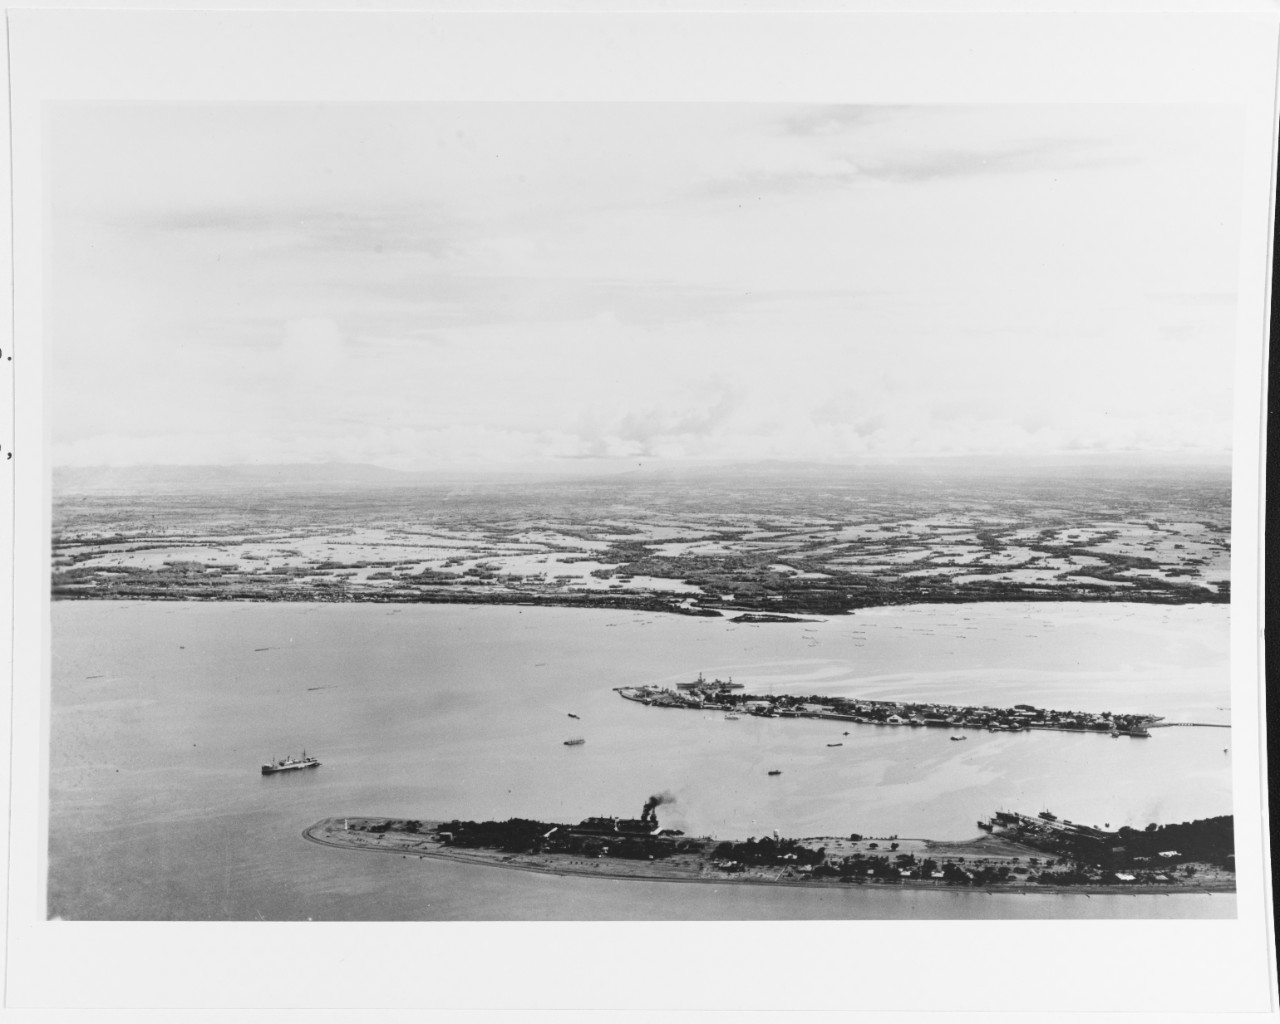 Photo #: NH 78381  Cavite Navy Yard and Sangley Point Naval Station, Philippine Islands